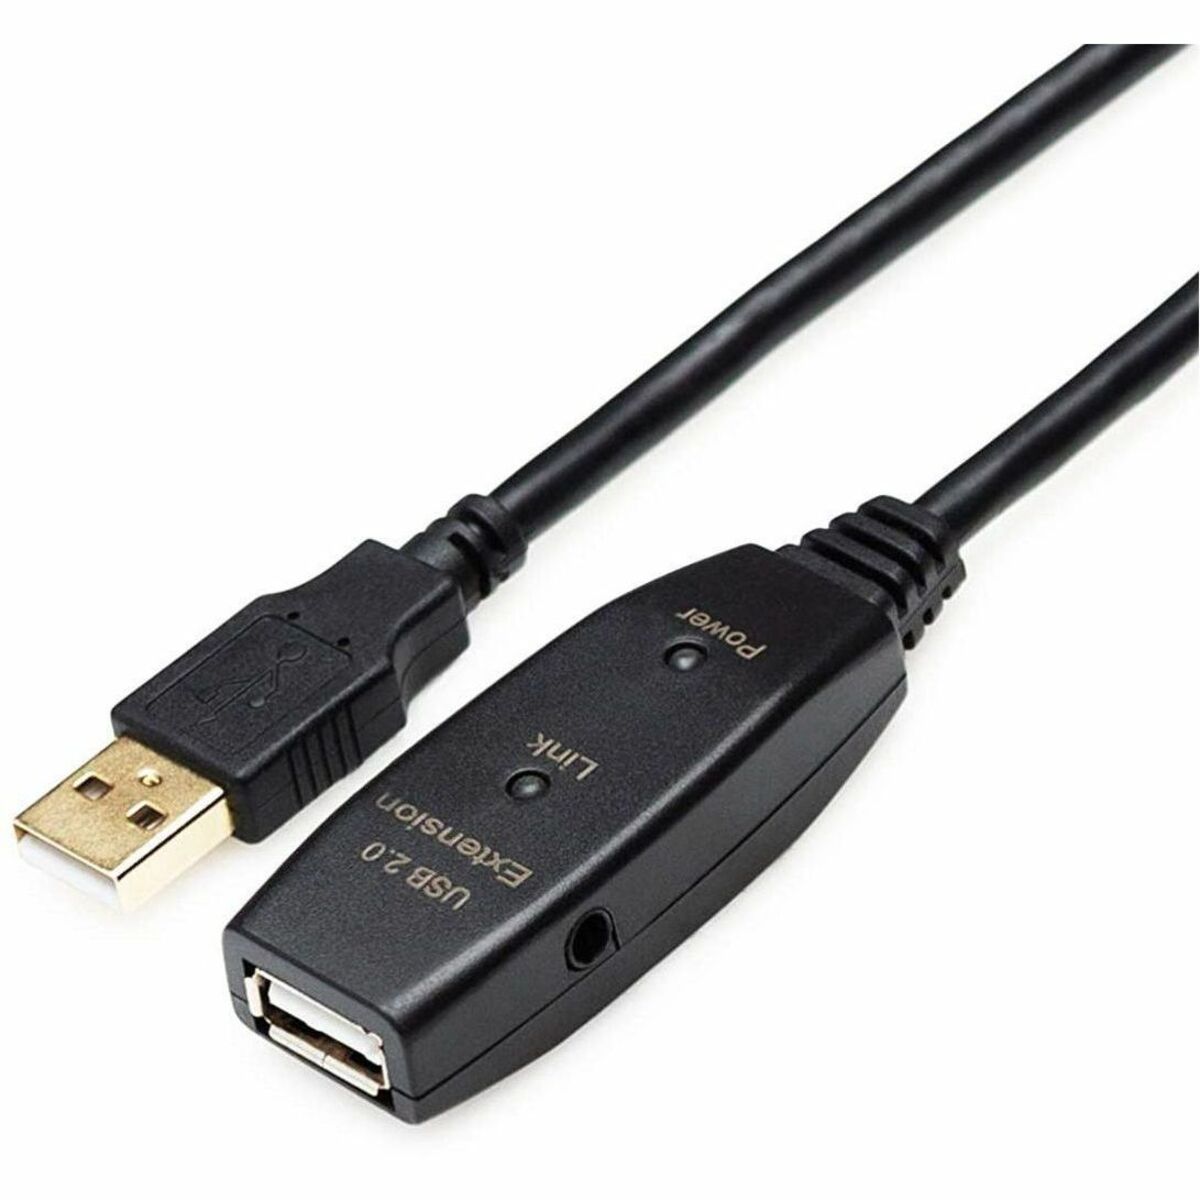 4XEM 4X3202A120M 20M USB 2.0 Active Extension Cable, Plug & Play, Signal Booster, Triple Shielded